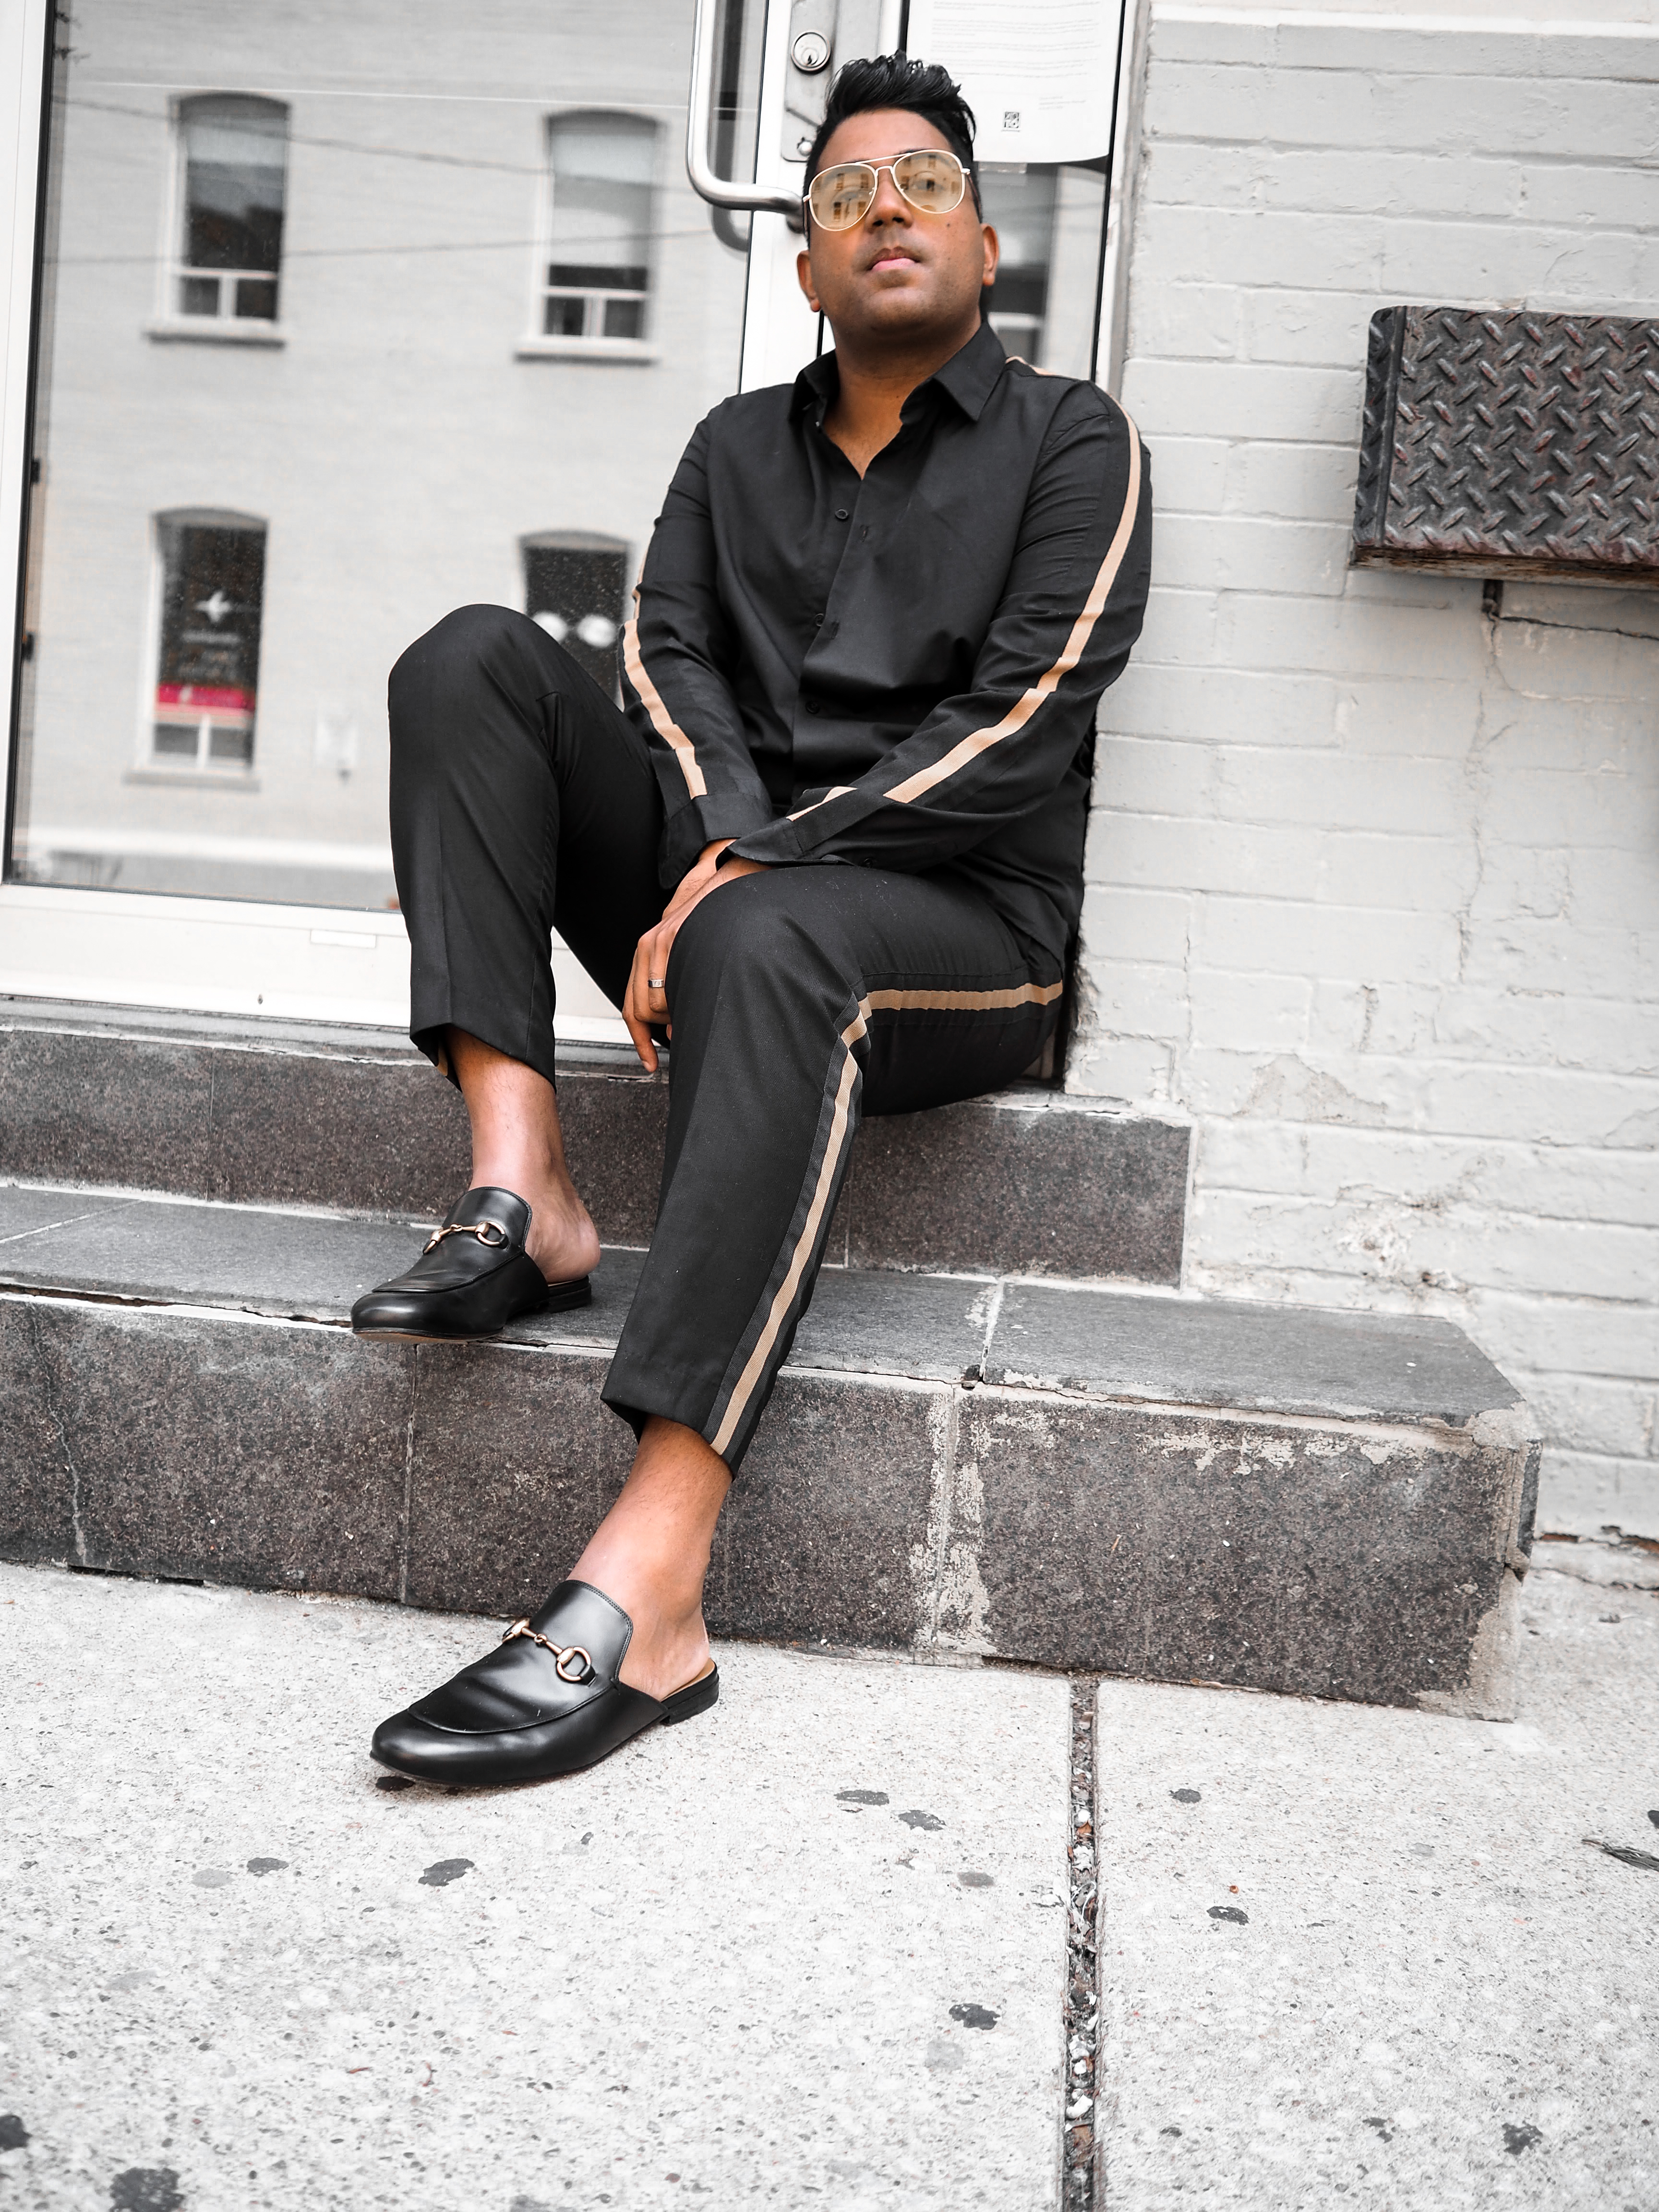 ENDOXIST | Gucci Princetown | Toronto Street Style | Say Goodbye to Summer | All Black Looks